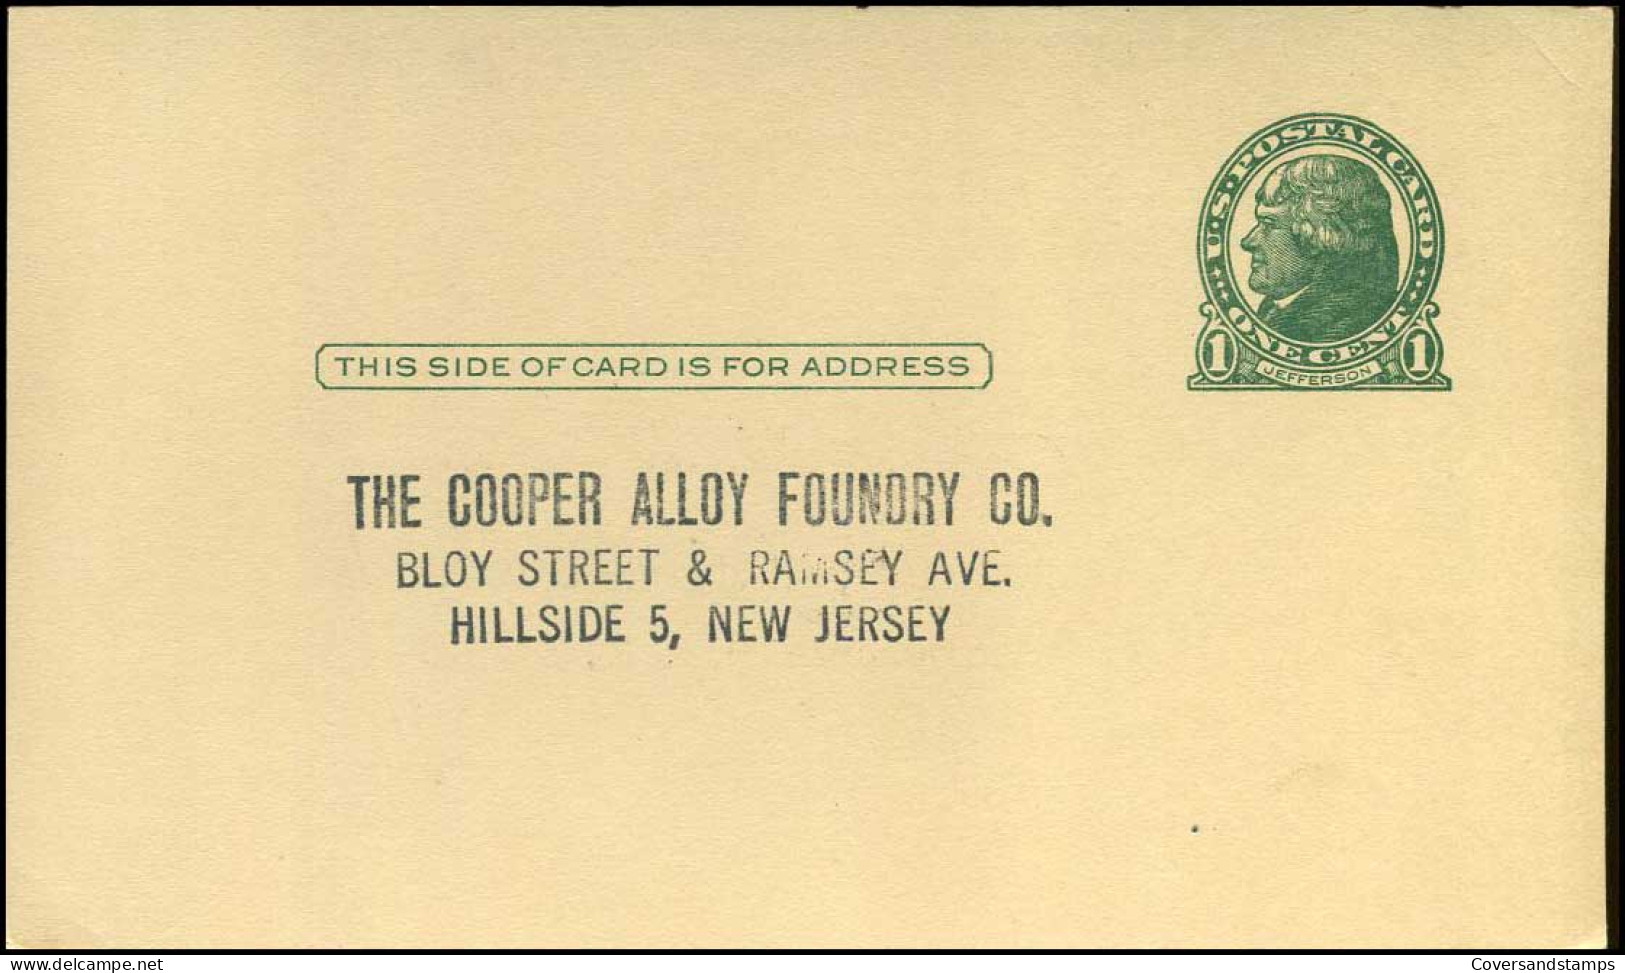 Postal Stationary - "The Cooper Alloy Foundry Co" - 1941-60